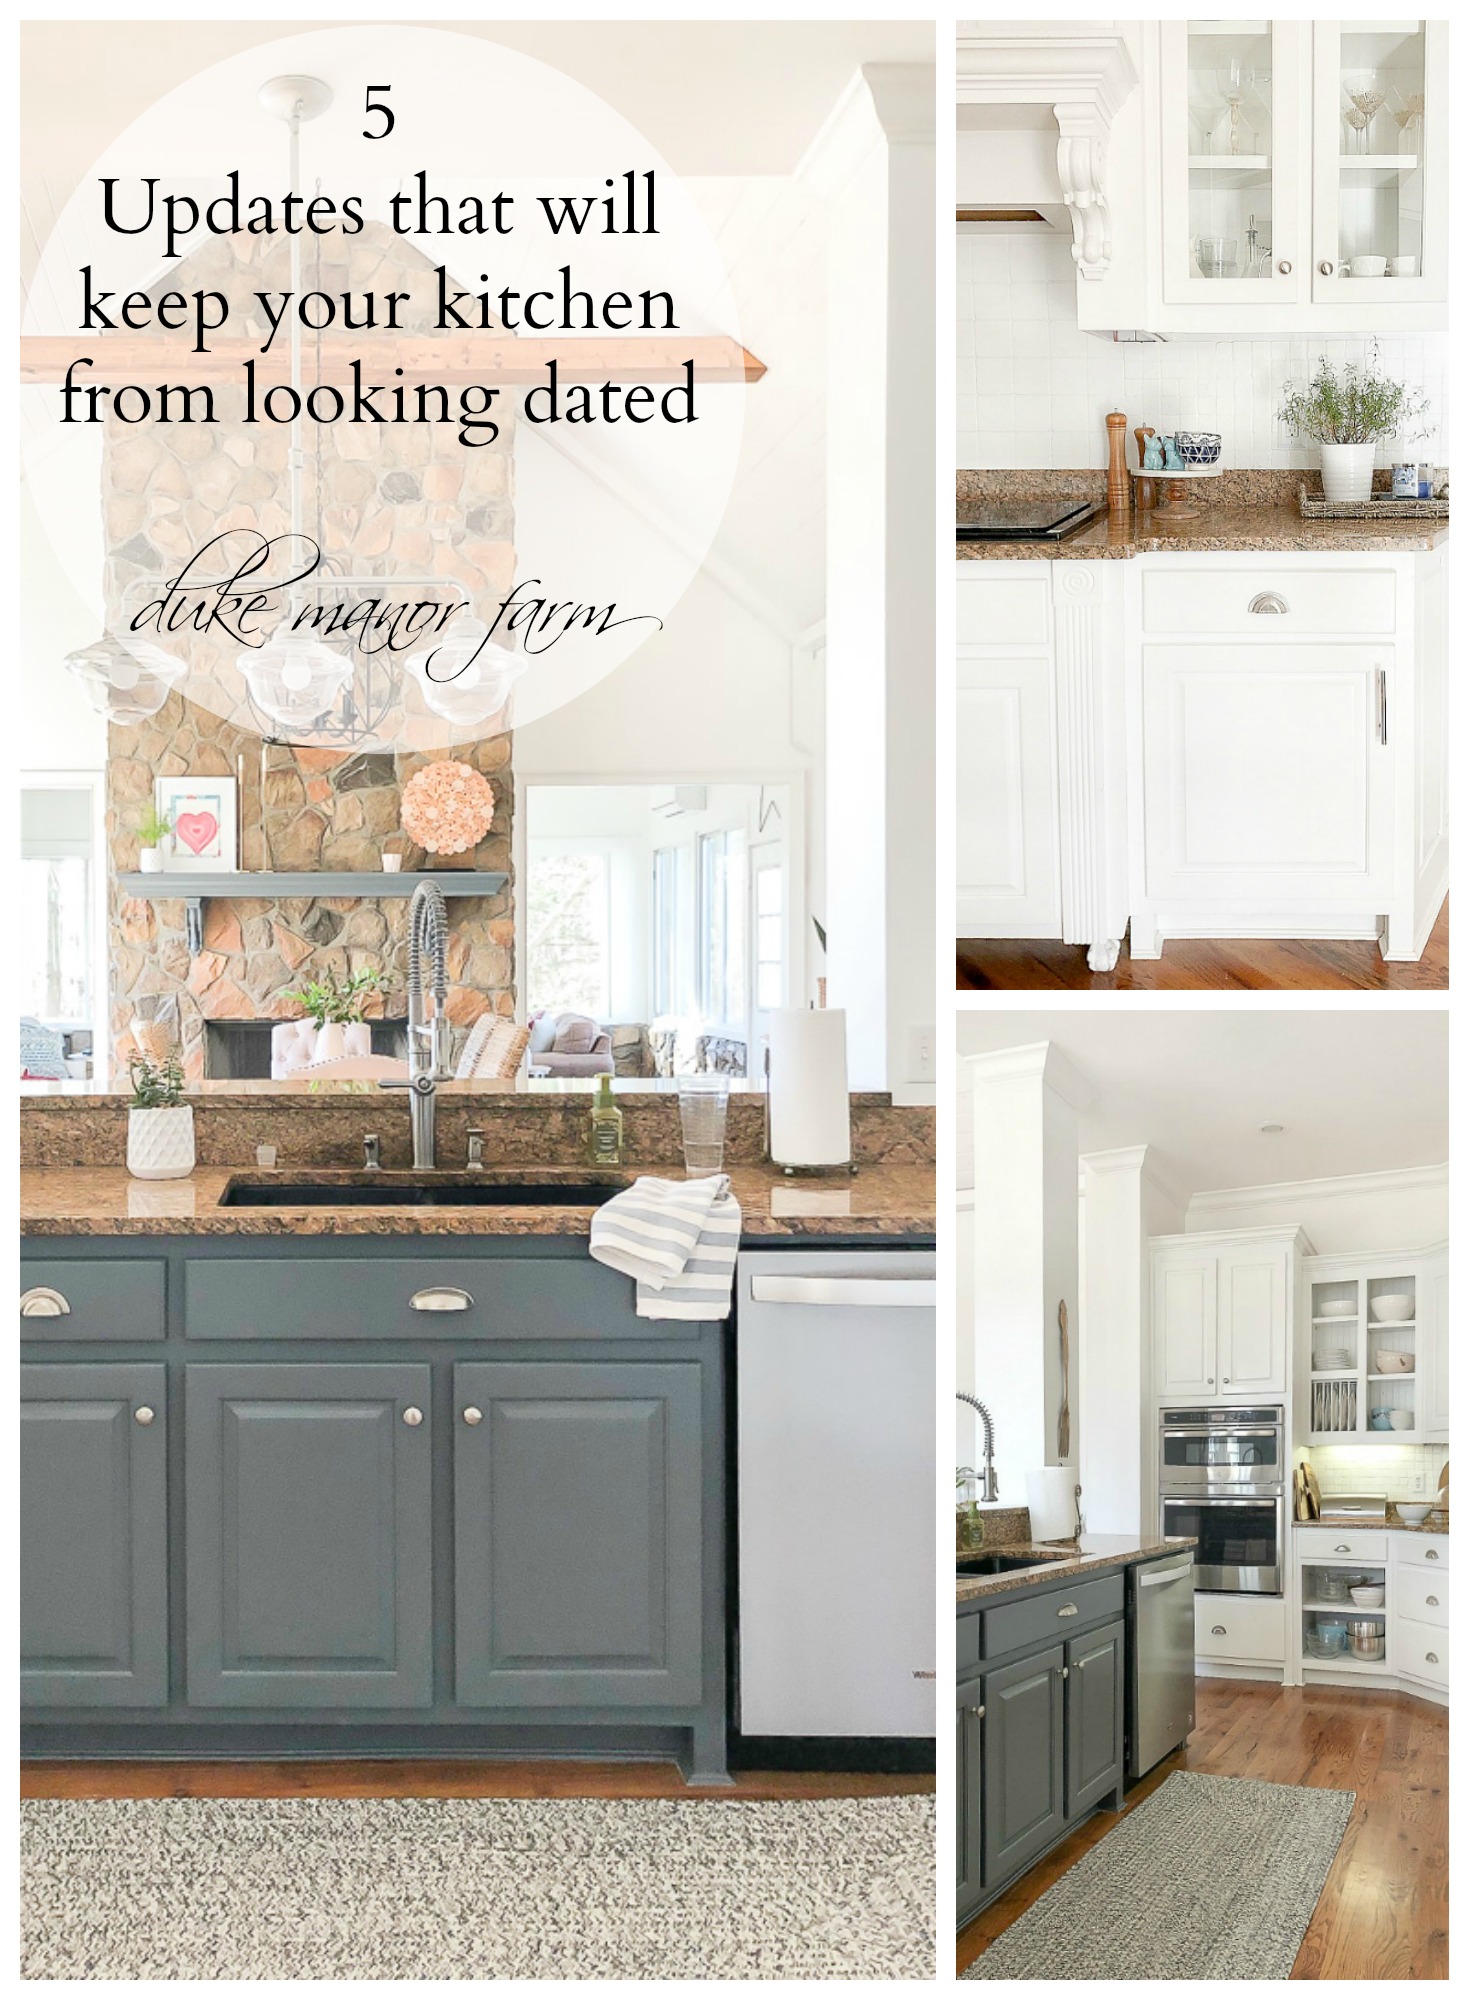 5 Updates That Will Keep Your Kitchen From Looking Dated Duke